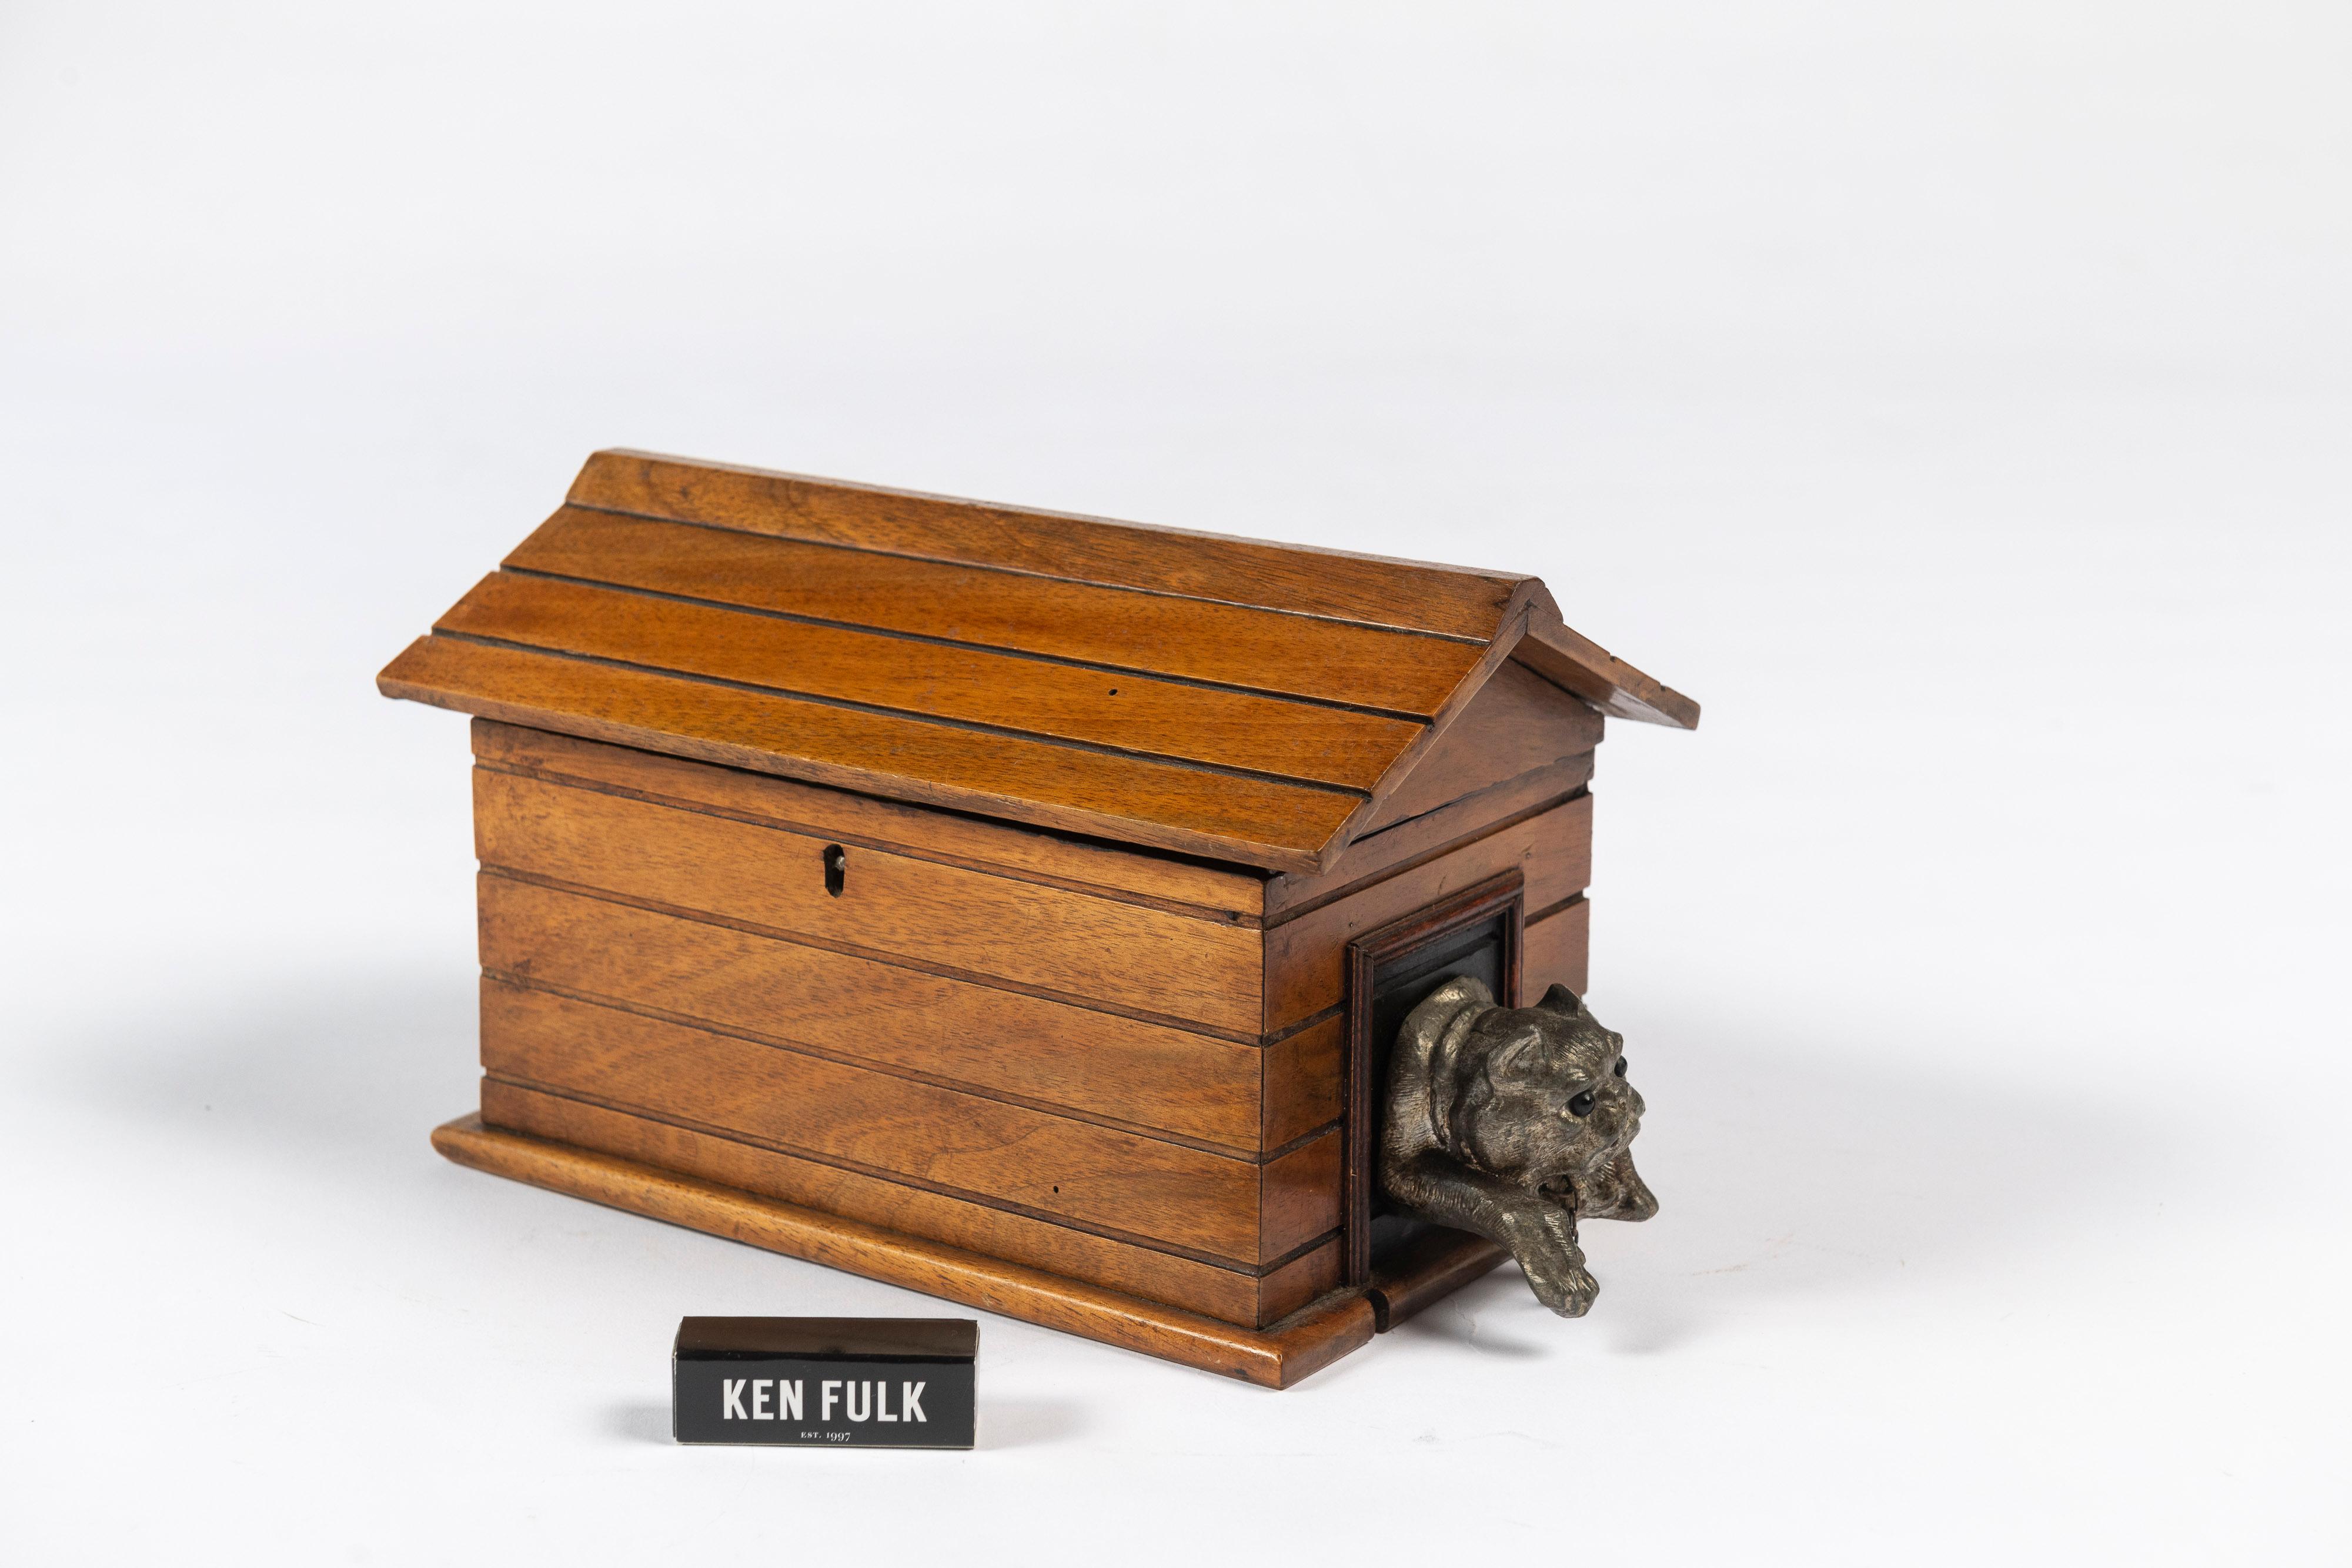 Charming 19th Century cigar box or humidor guarded by a metal dog with glass eyes on a short lease. These boxes are perfect for collectors of boxes, canine themed items or smoking paraphernalia.